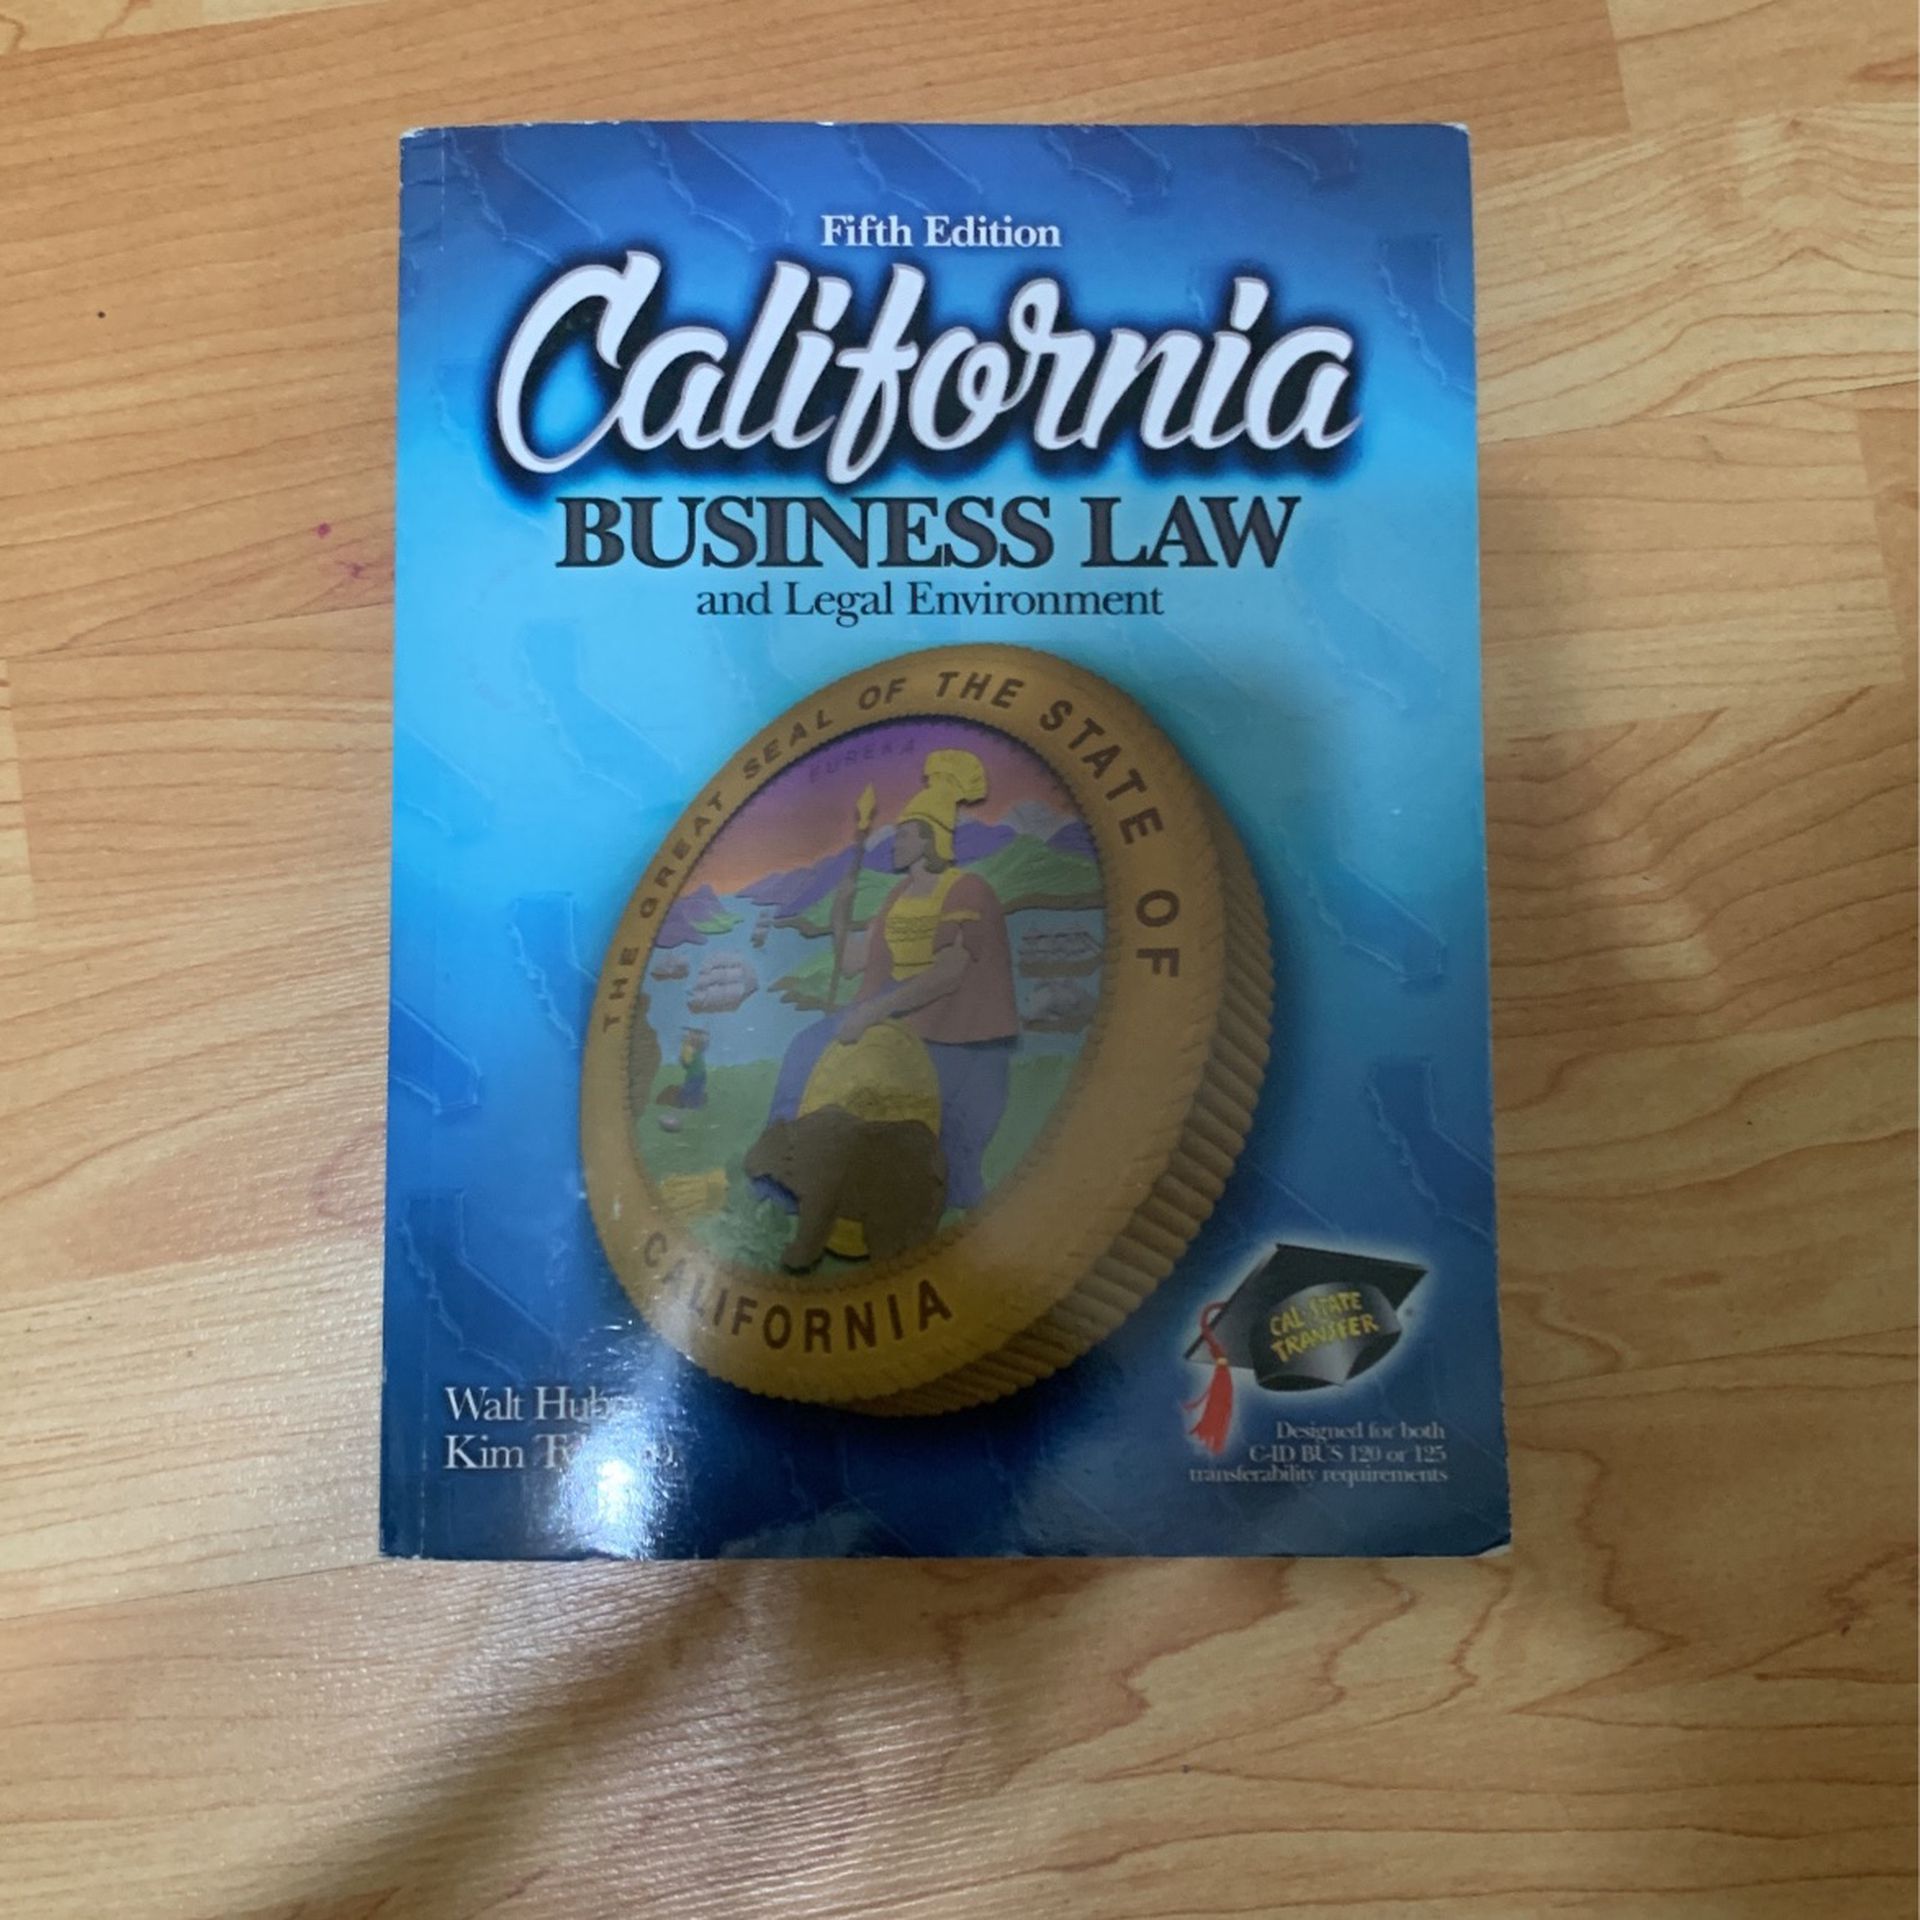 California Business law & legal environment Fifth Edition